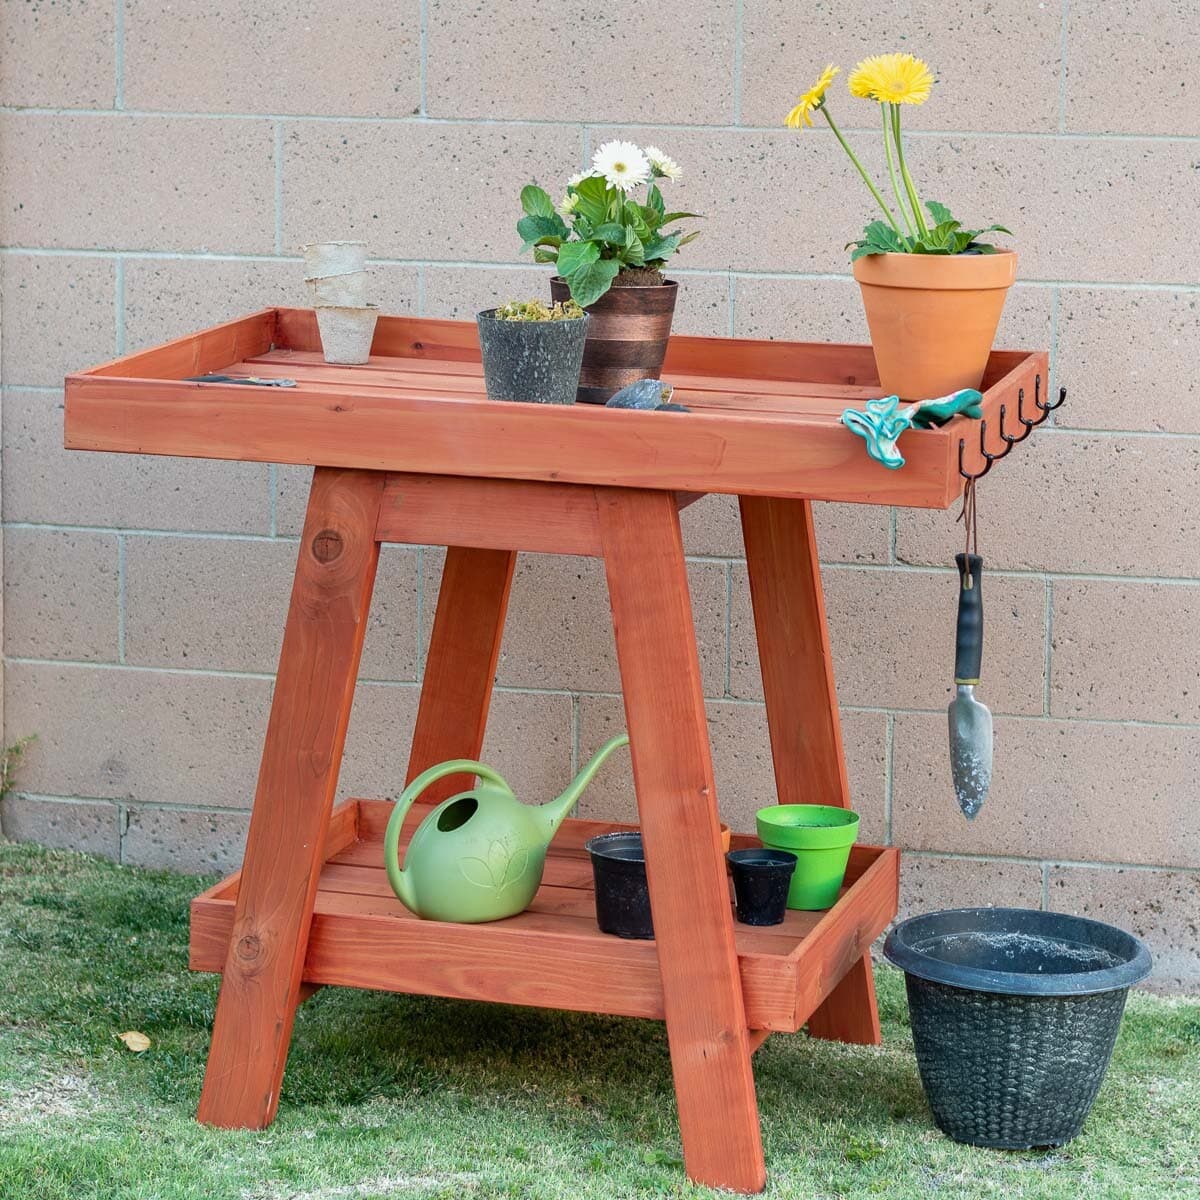 Learn how to build this simple and modern DIY potting bench with a step-by-step tutorial and plans. It can also double as a plant display or console table. Great beginner woodworking project.